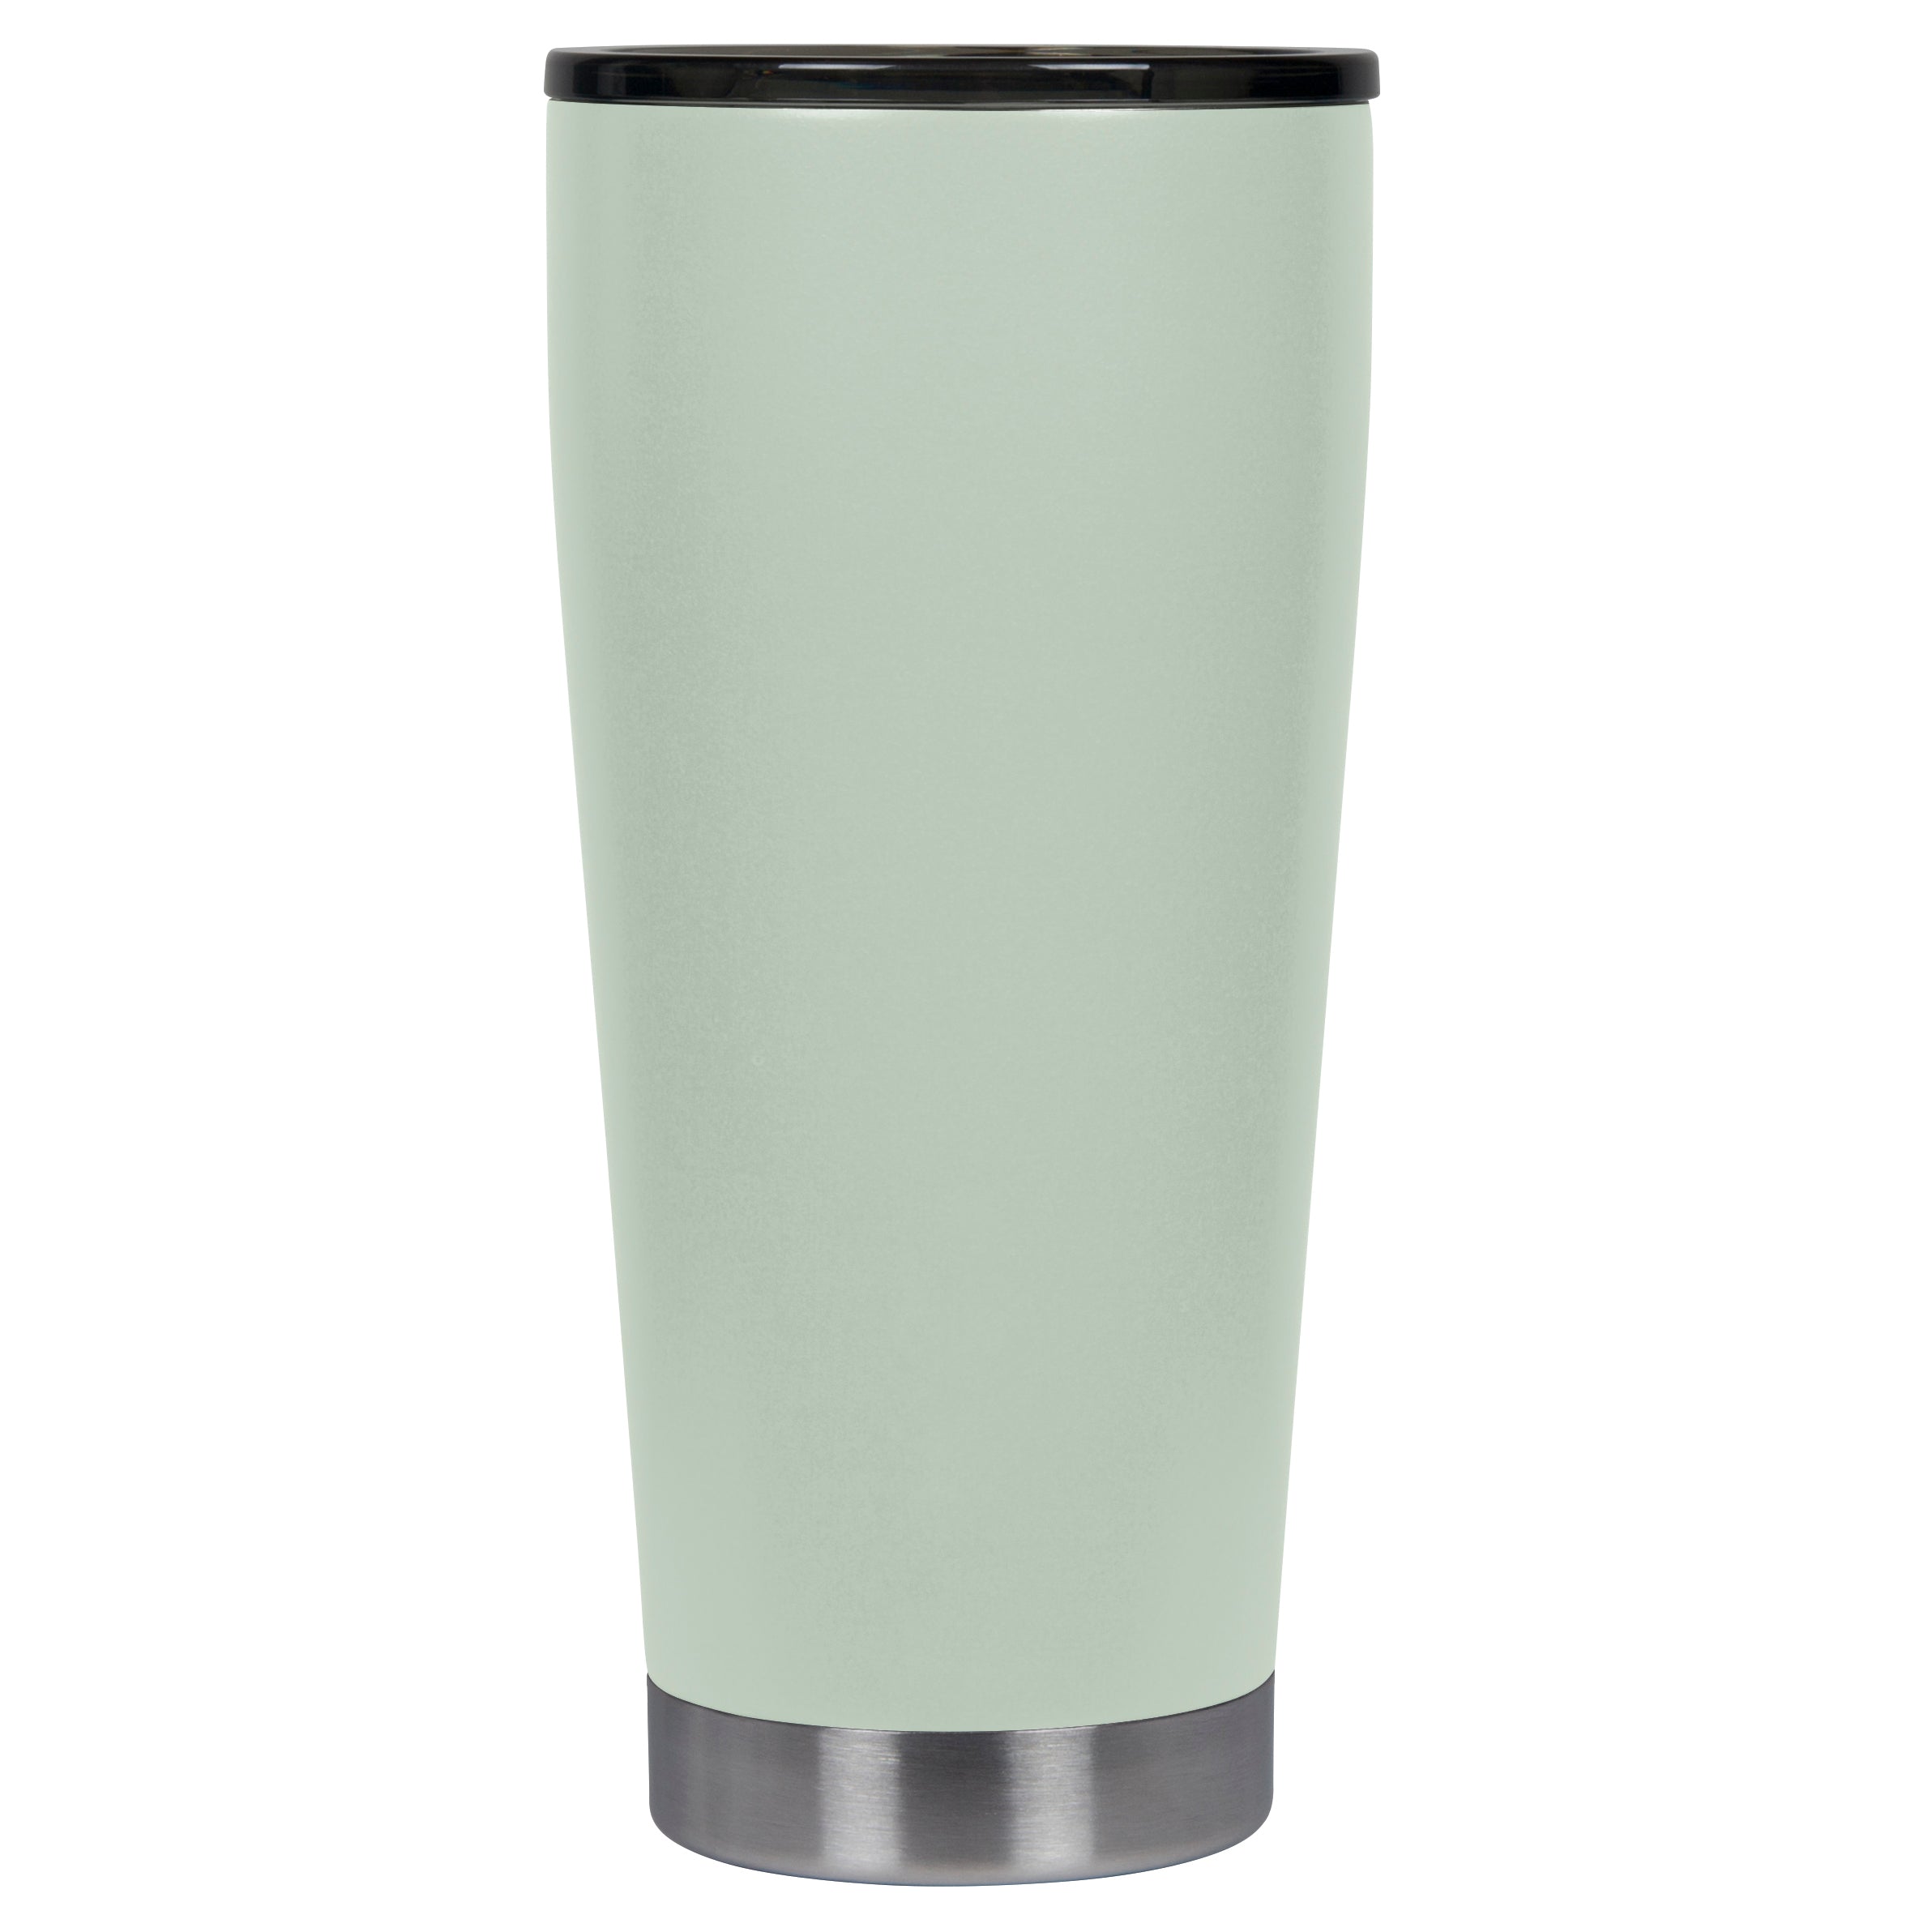 Stainless Steel Tumbler with Lid and Straw - 20oz - Dark Green